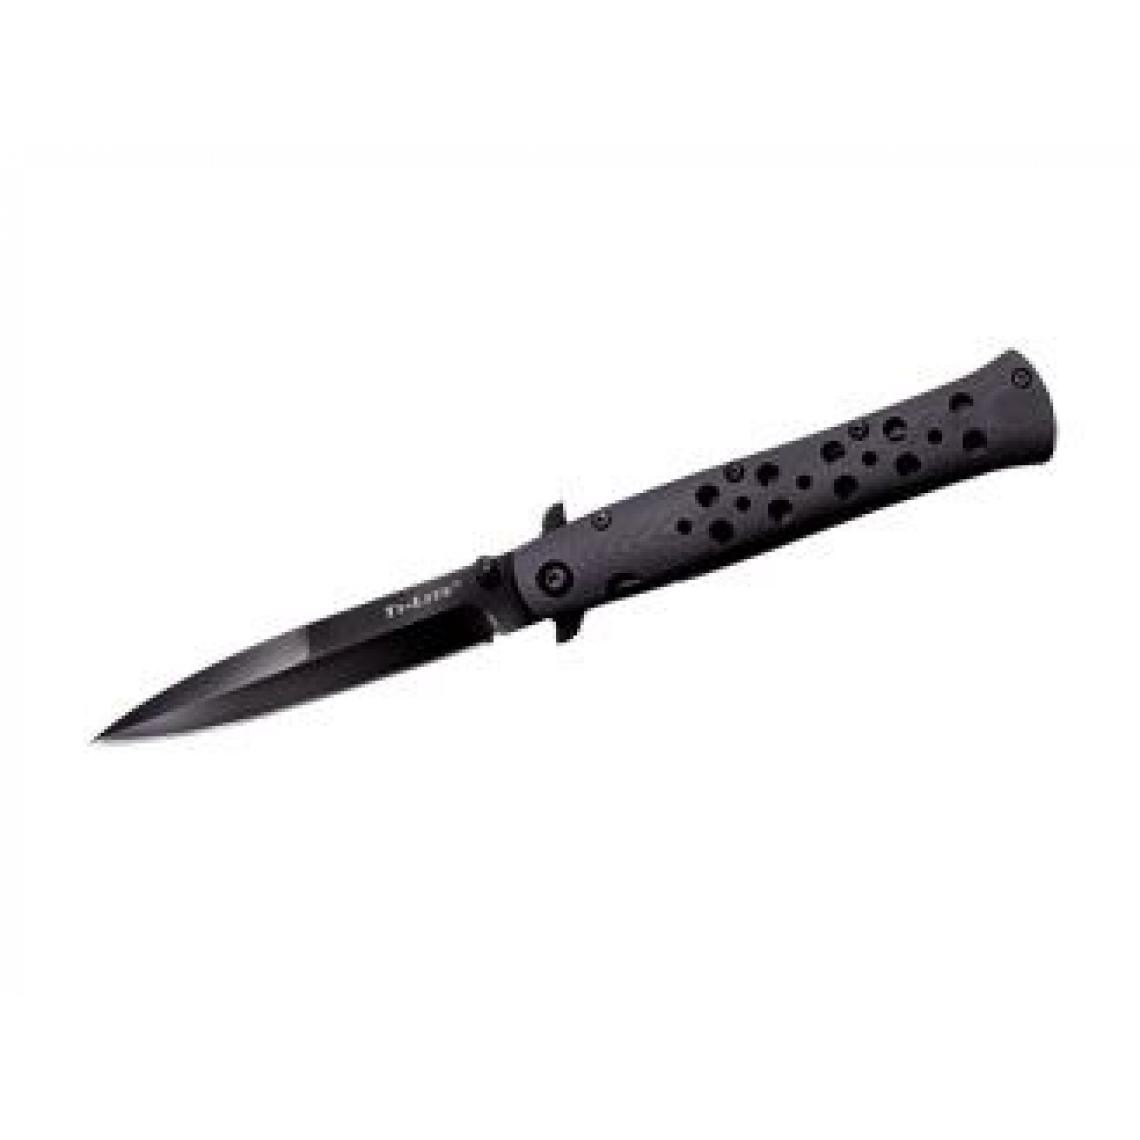 Divers Marques - Cold Steel TI-LITE 4" G-10 S35VN STEEL 26C4 - Outils de coupe